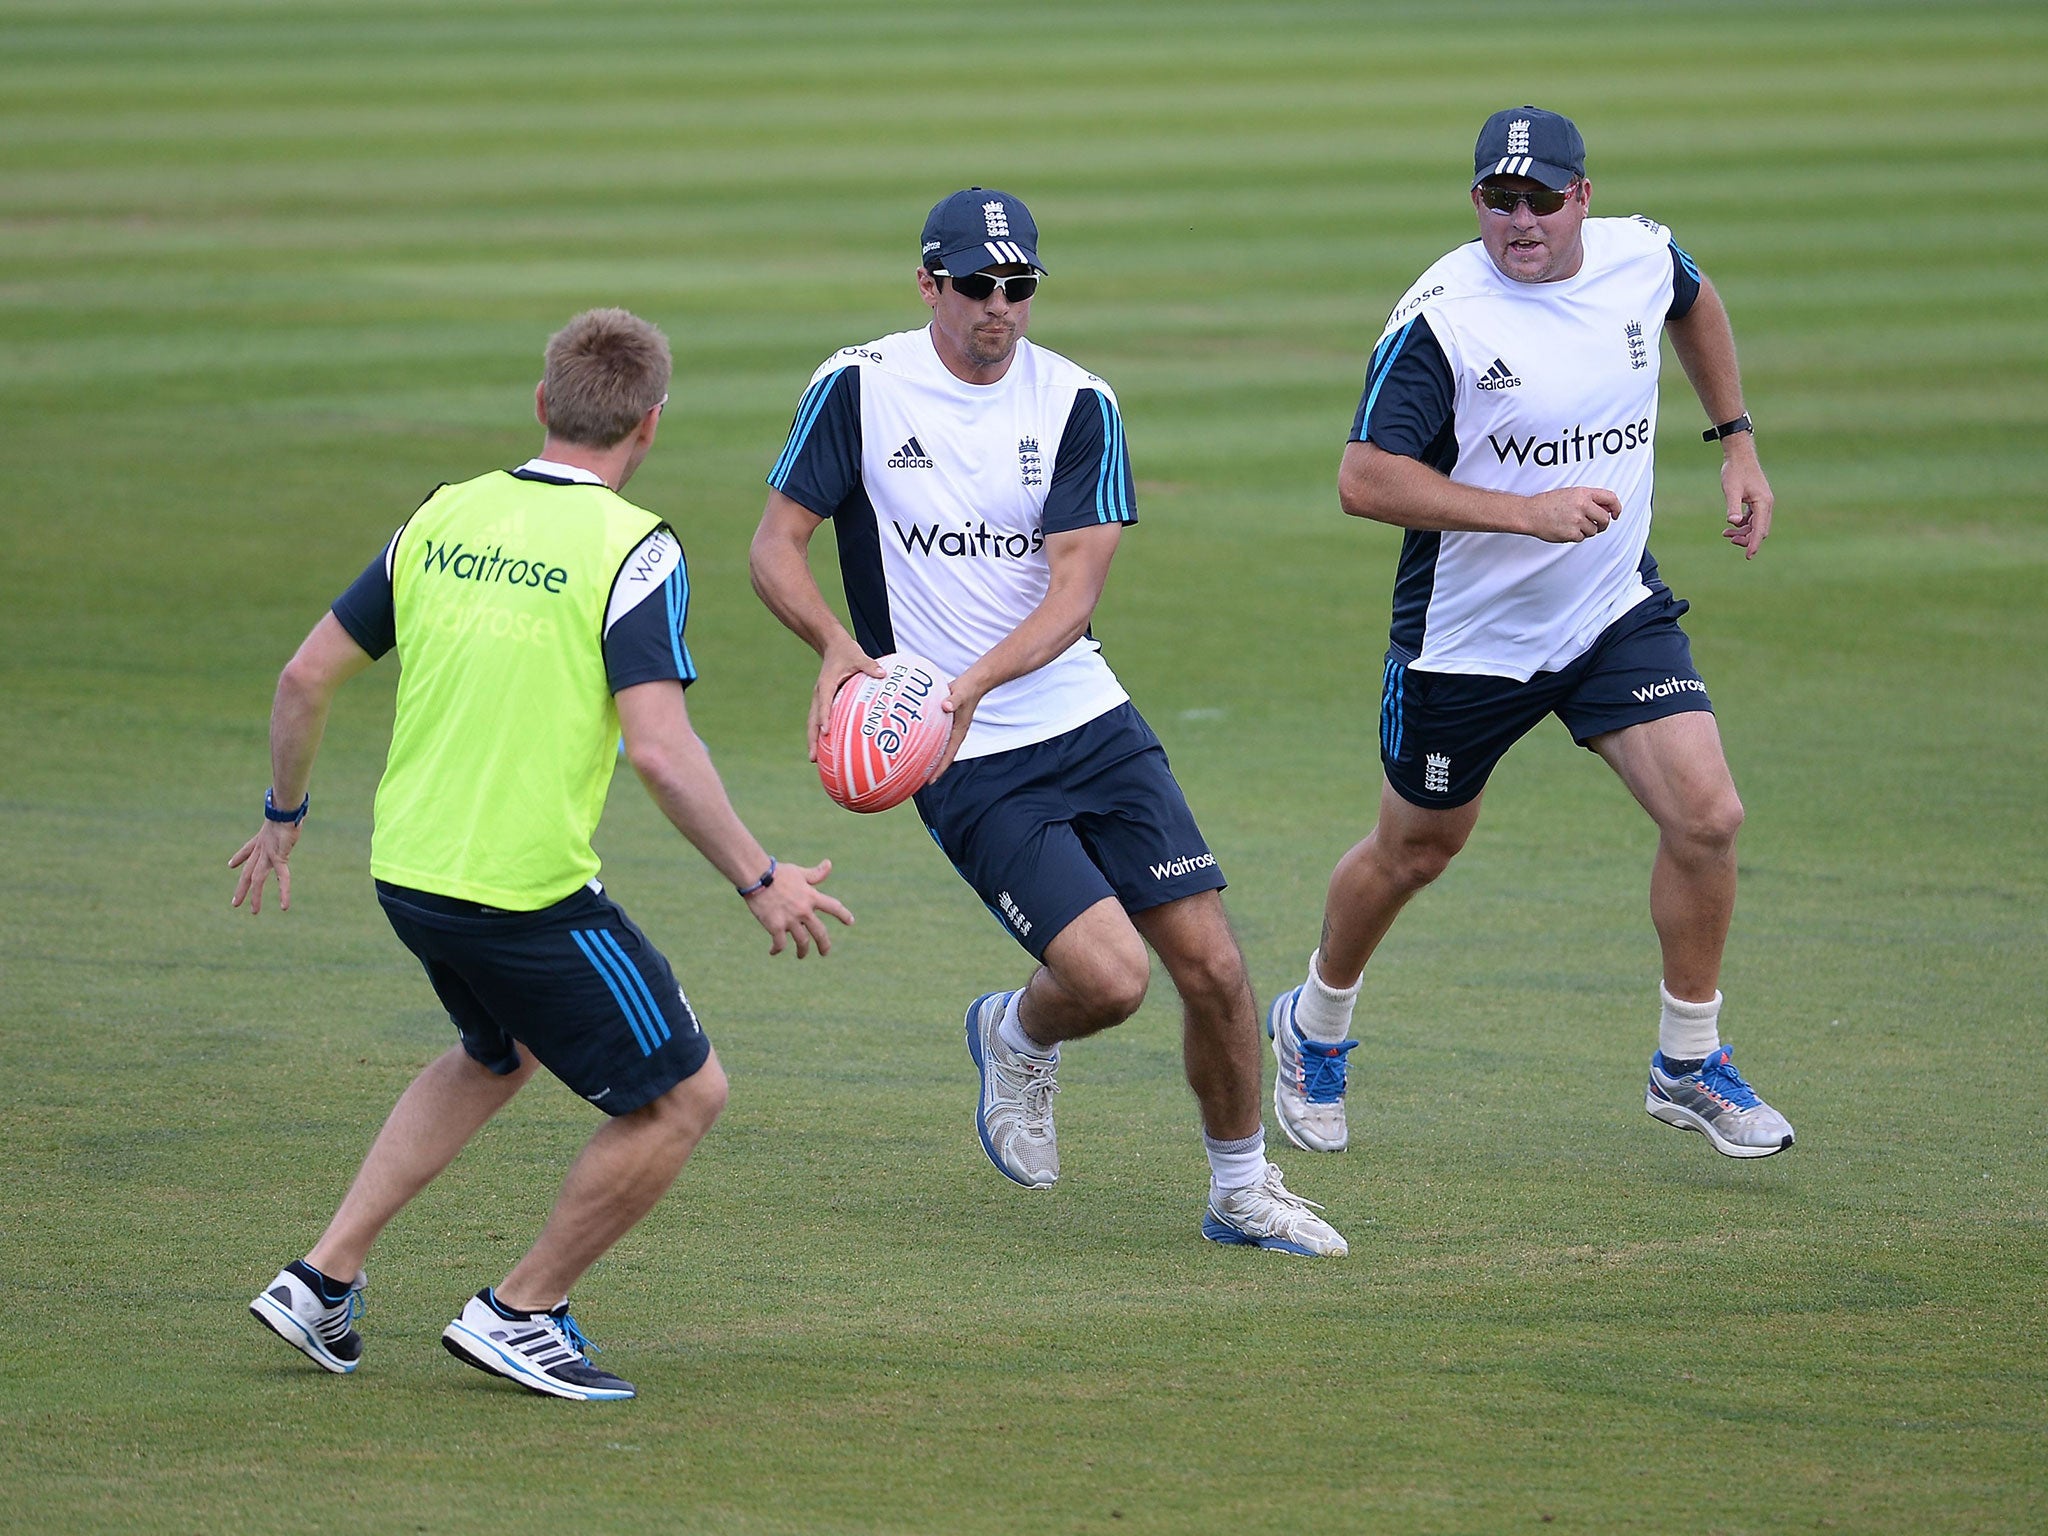 Alastair Cook tries his hand at rugby during yesterday’s
training session at the Ageas Bowl